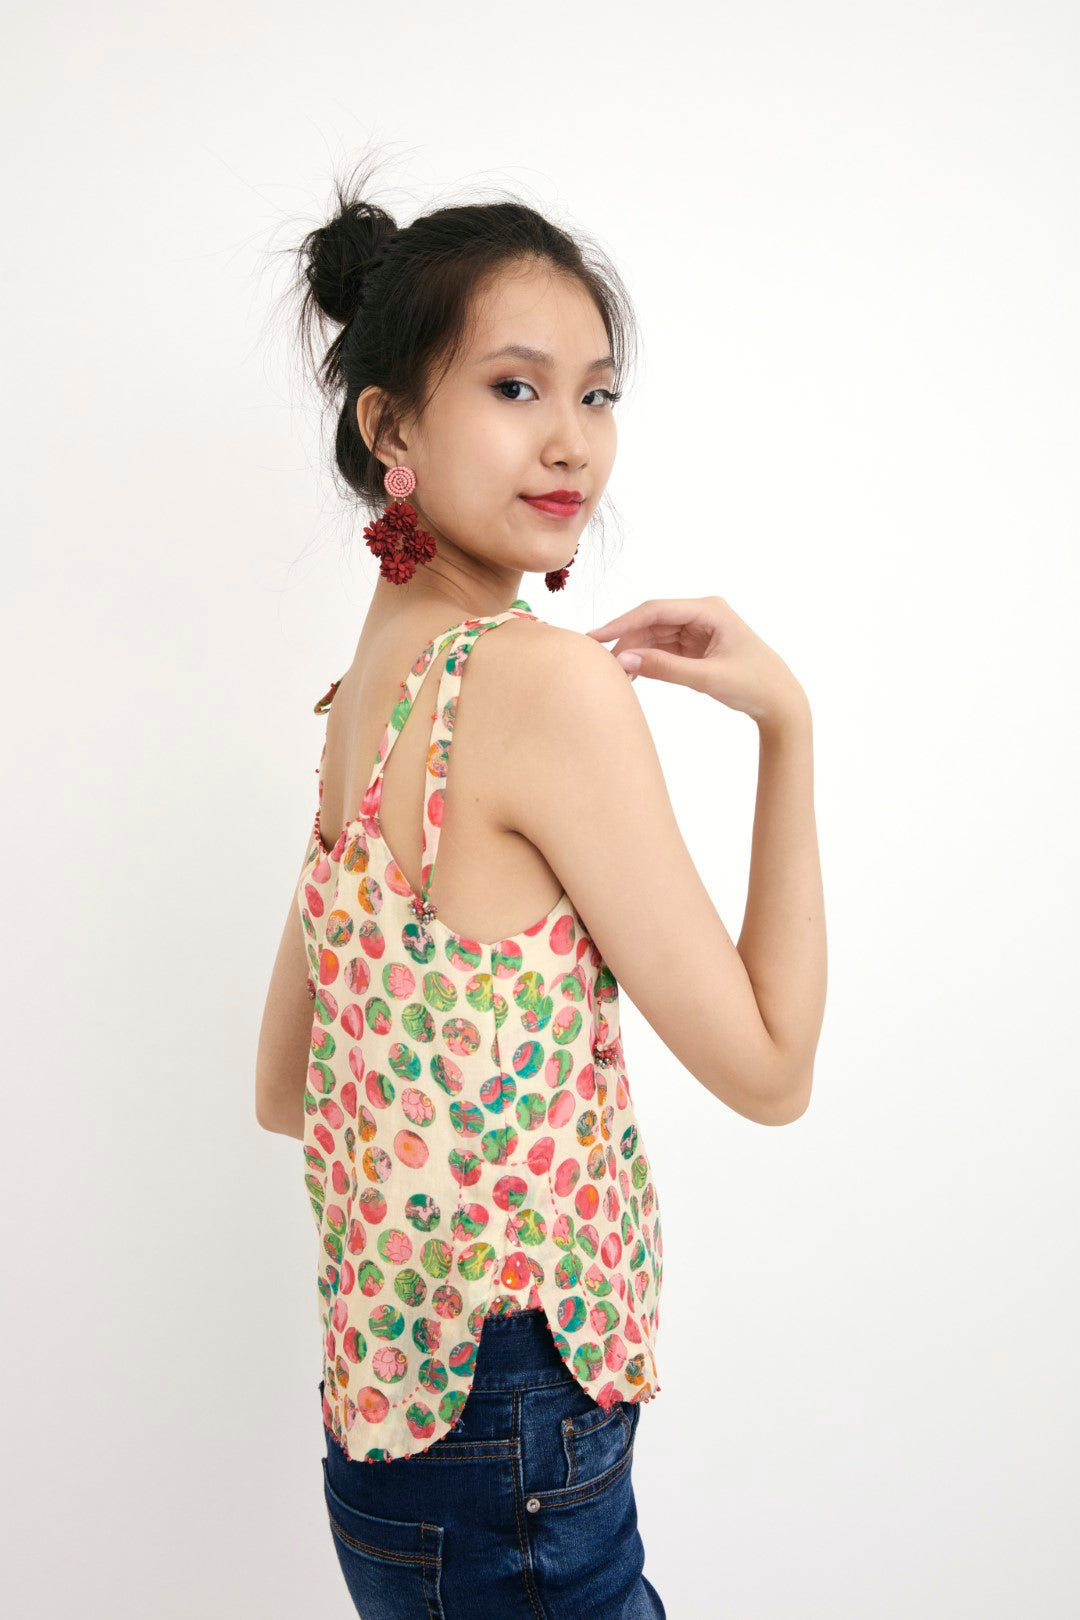 "Handwove cream hand-painted polka dot printed camisole in handwoven cotton silk, embellished with french knots and sequins. 100% Handwoven cotton silk; Lining: 100% cotton 100% Azo Free Dry Clean Only"